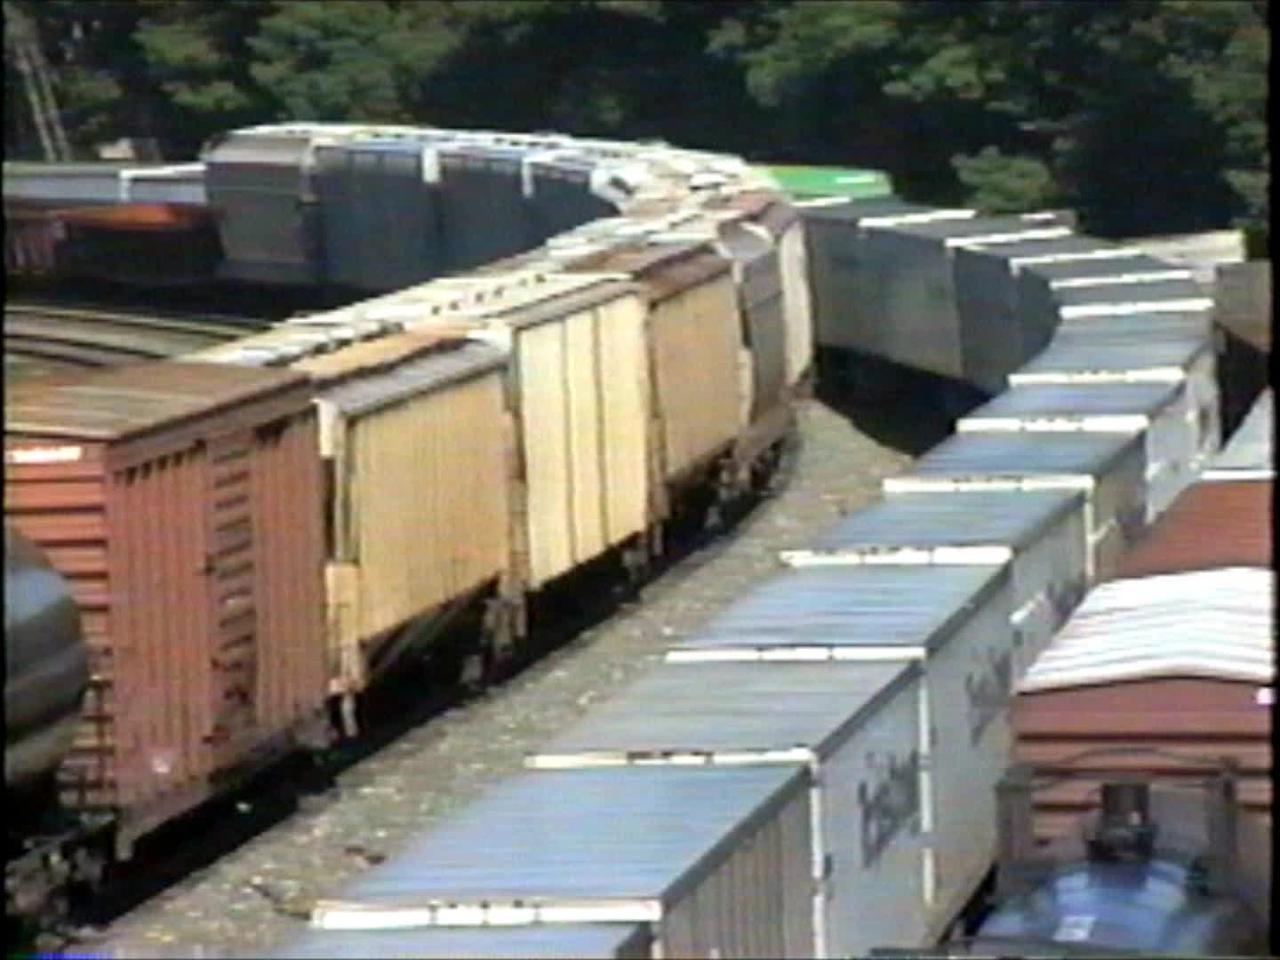 Trains in Pennsylvania and New Jersey